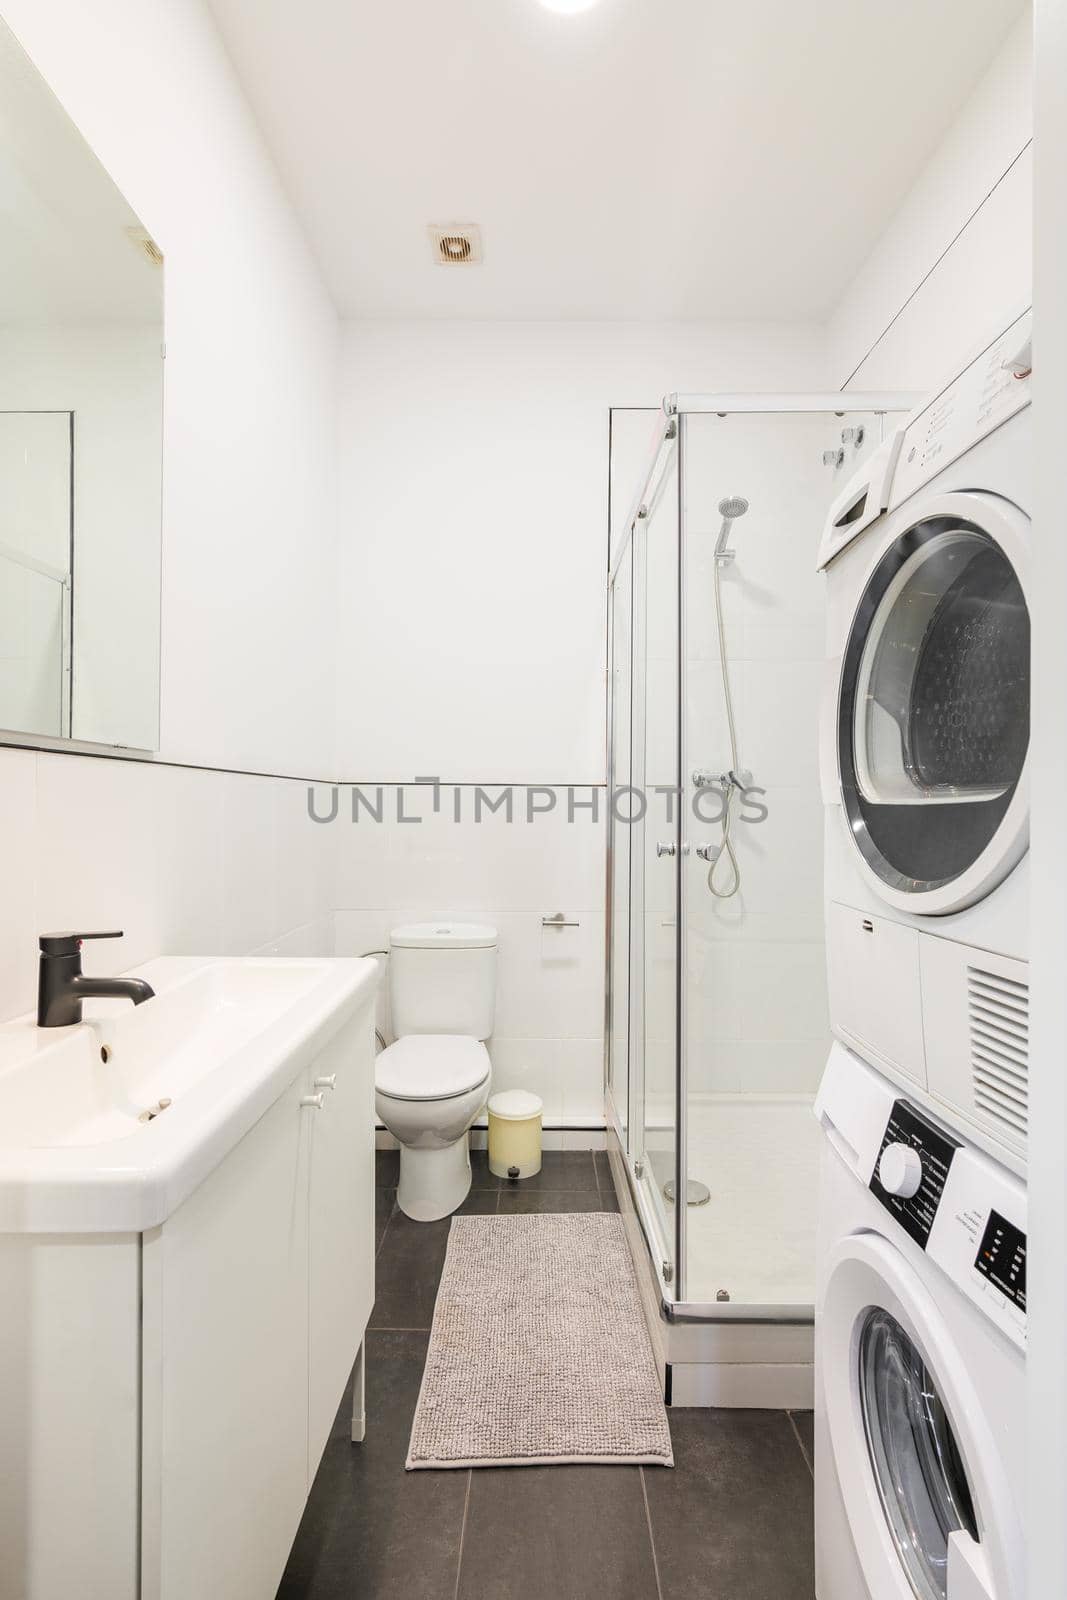 Small and narrow white bathroom with shower cabin, washing machine and dryer by apavlin